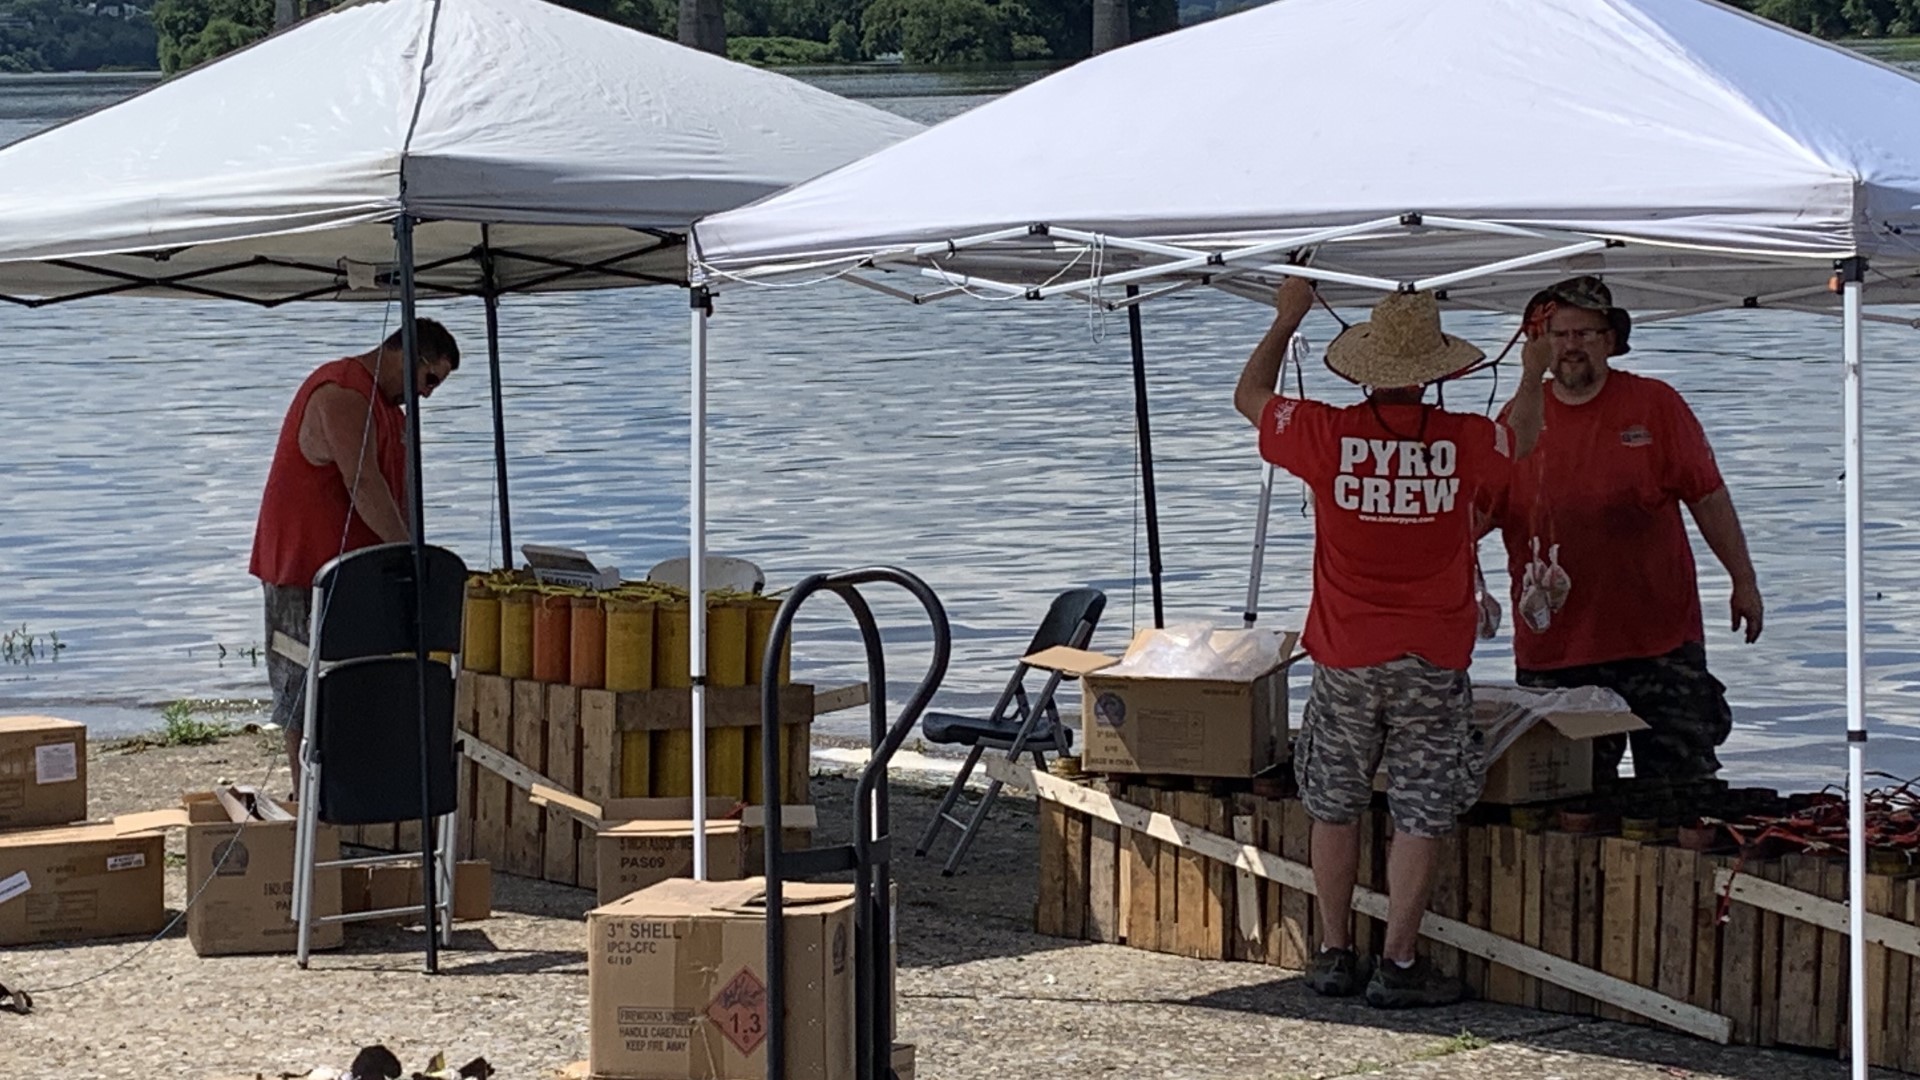 Crews worked over six hours to prepare the 15-minute firework show for the end of the Harrisburg's July 4th Food Truck and Firework Festival.